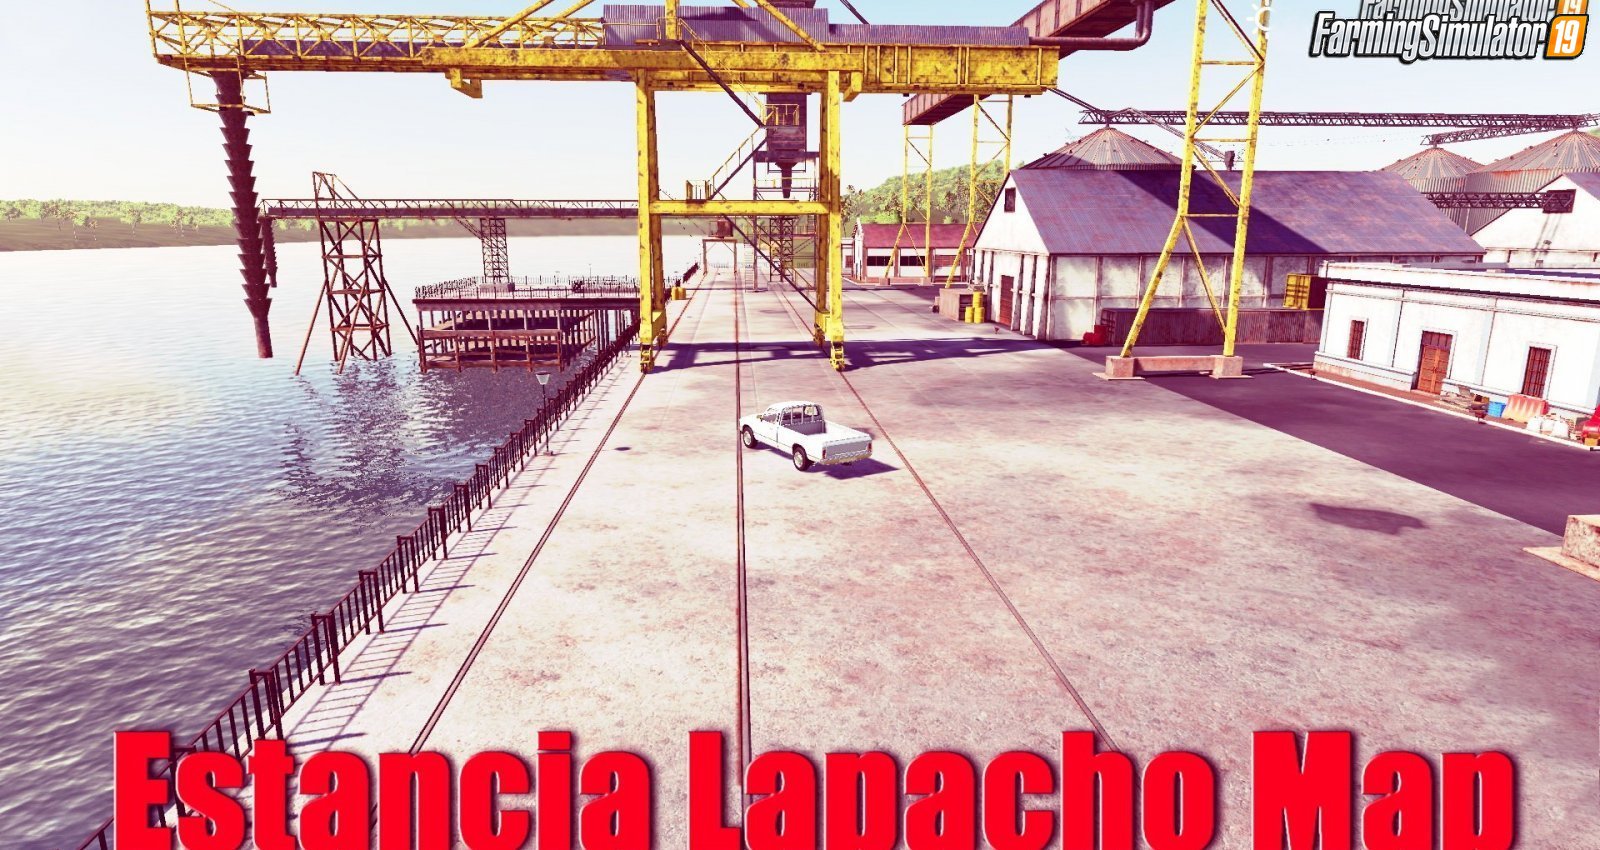 Estancia Lapacho Map v1.0.4 by GIANTS Software for FS19